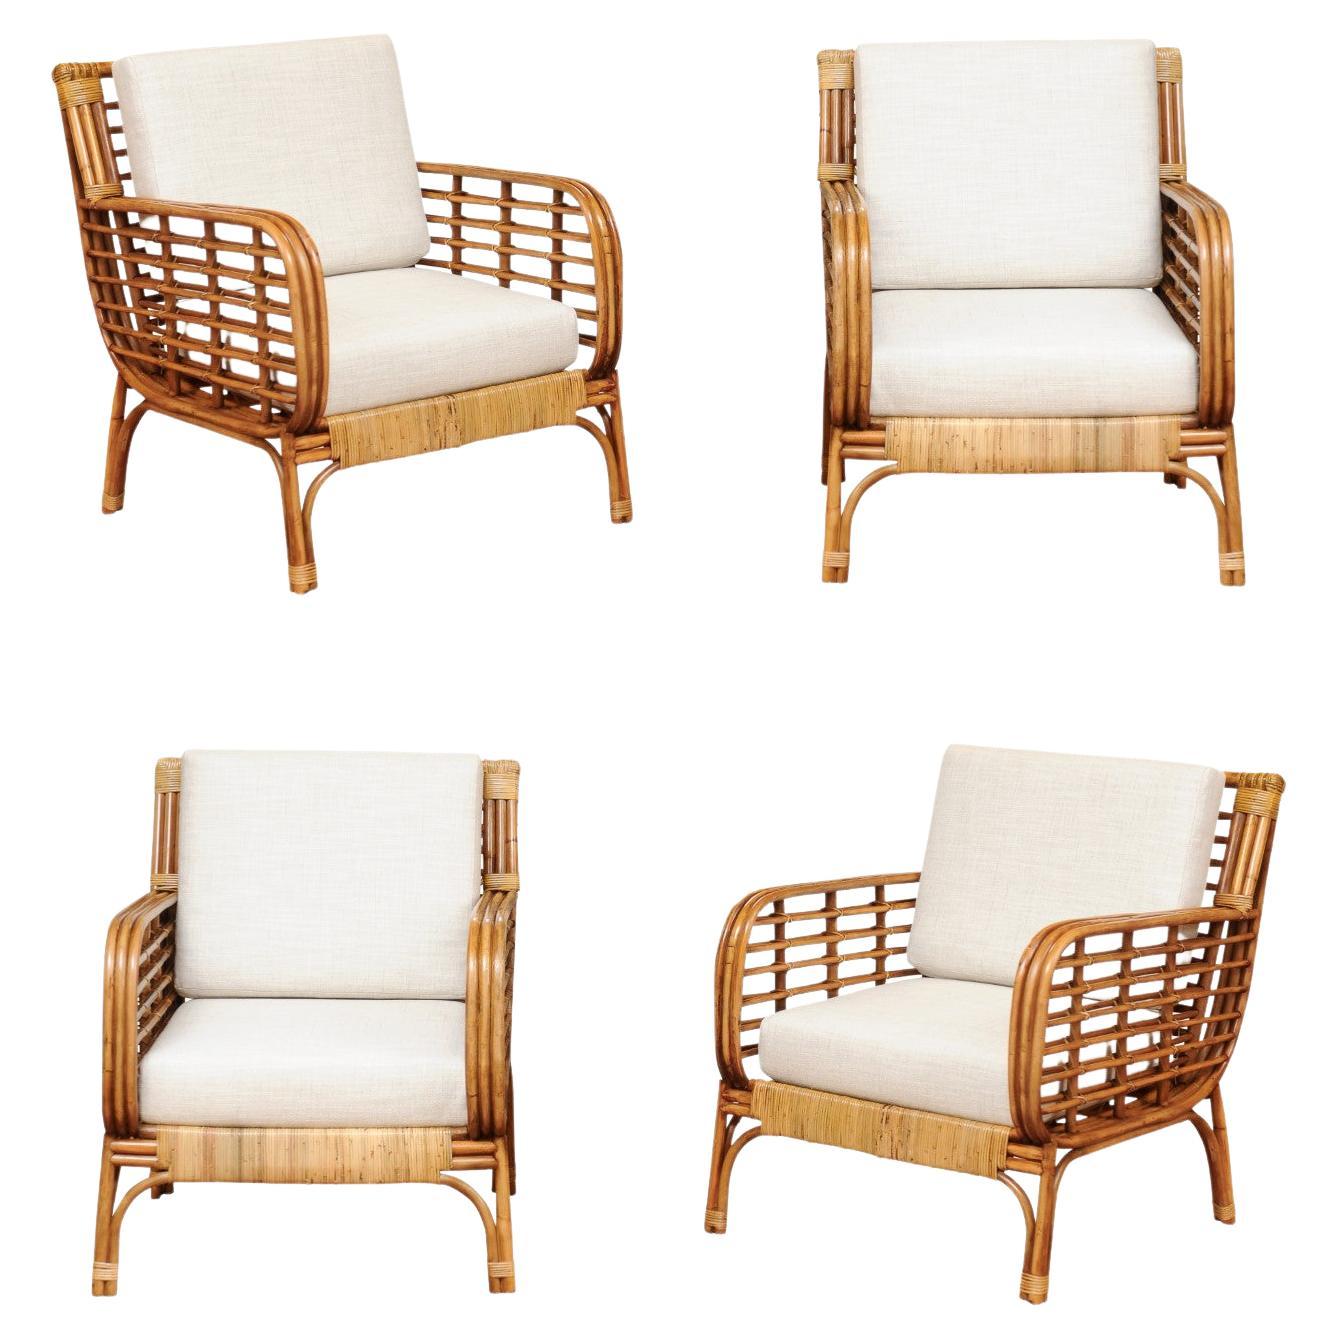 Set of 4 Fabulous Restored Birdcage Style Rattan and Cane Loungers, circa 1955